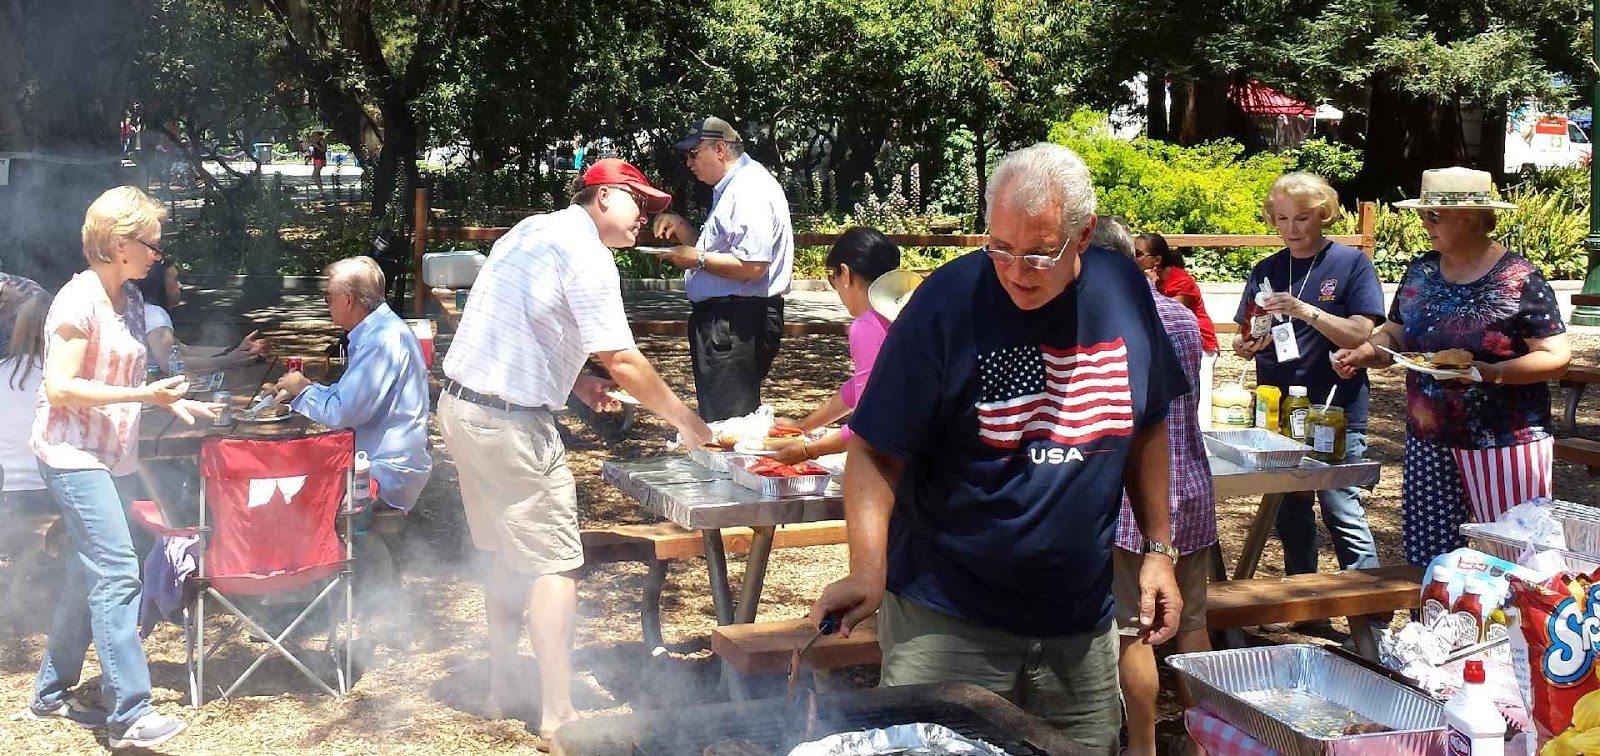 MyLiberty: Scenes from the July 4th BBQ